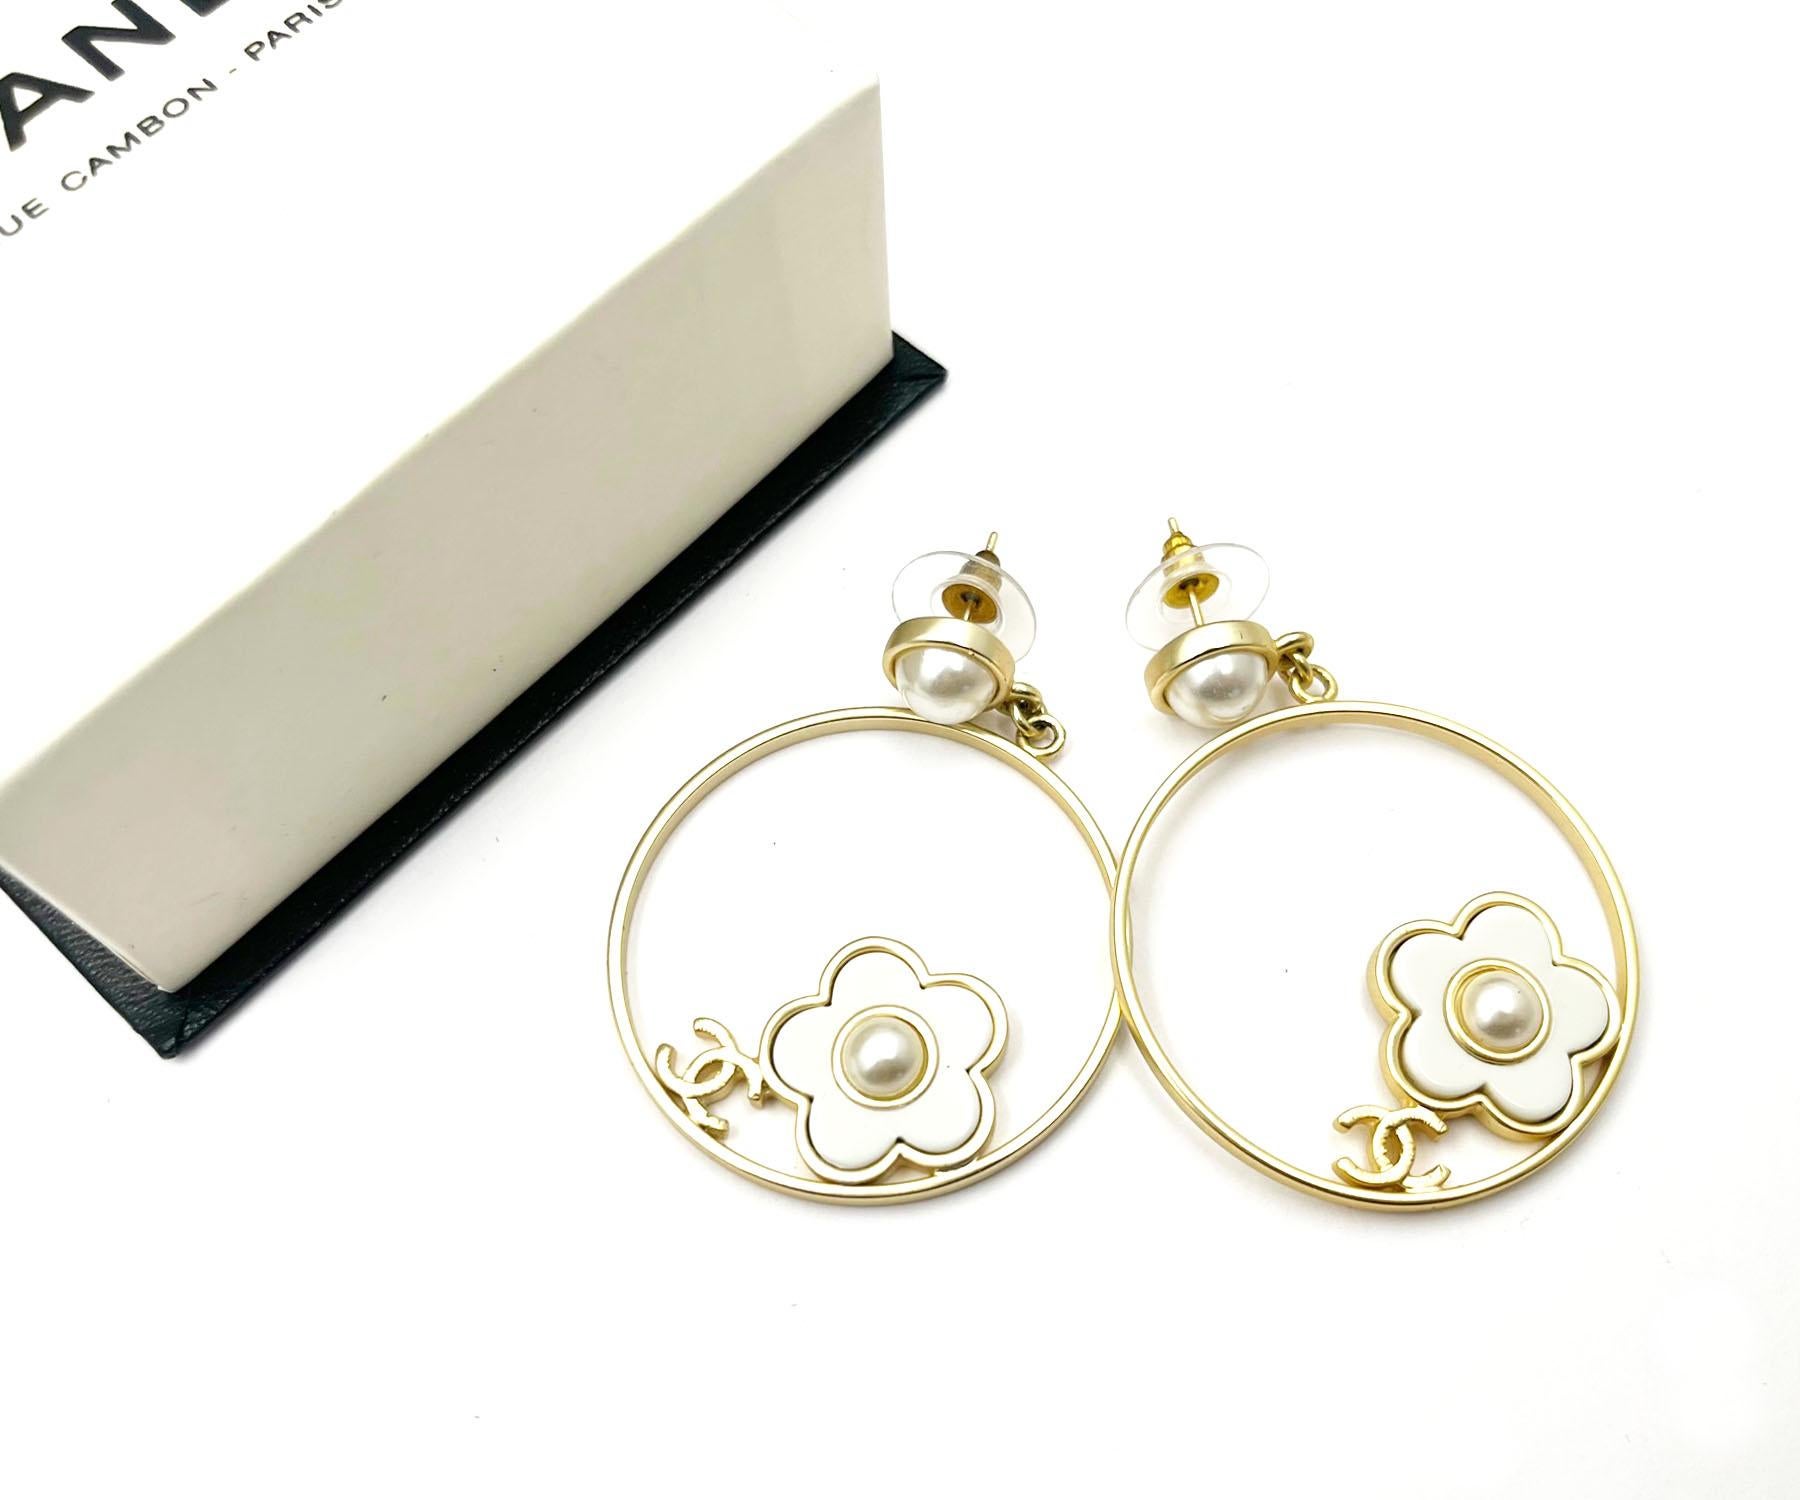 Chanel Iconic Gold CC White Daisy Round Ring Large Piercing Earrings

* Marked 18
* Made in France
* Comes with the original box

-It is approximately 2.1